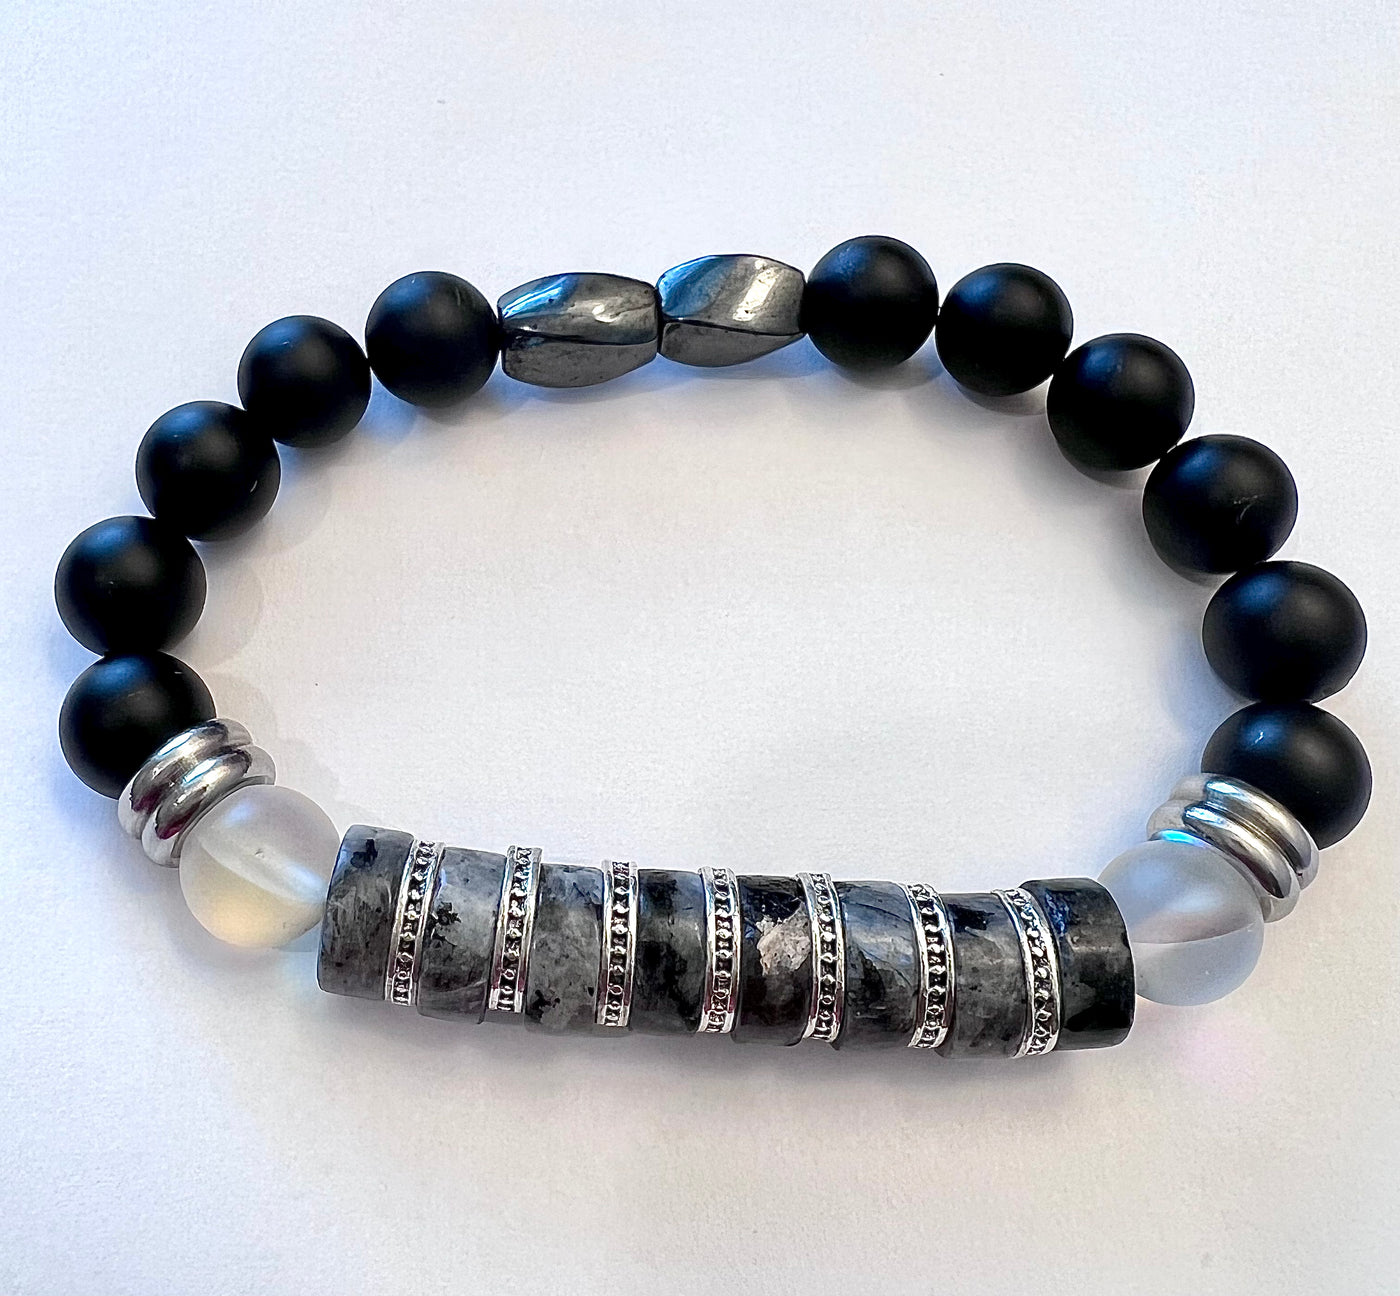 Labradorite bead bracelet with stainless steel spacers - Brent's Bling